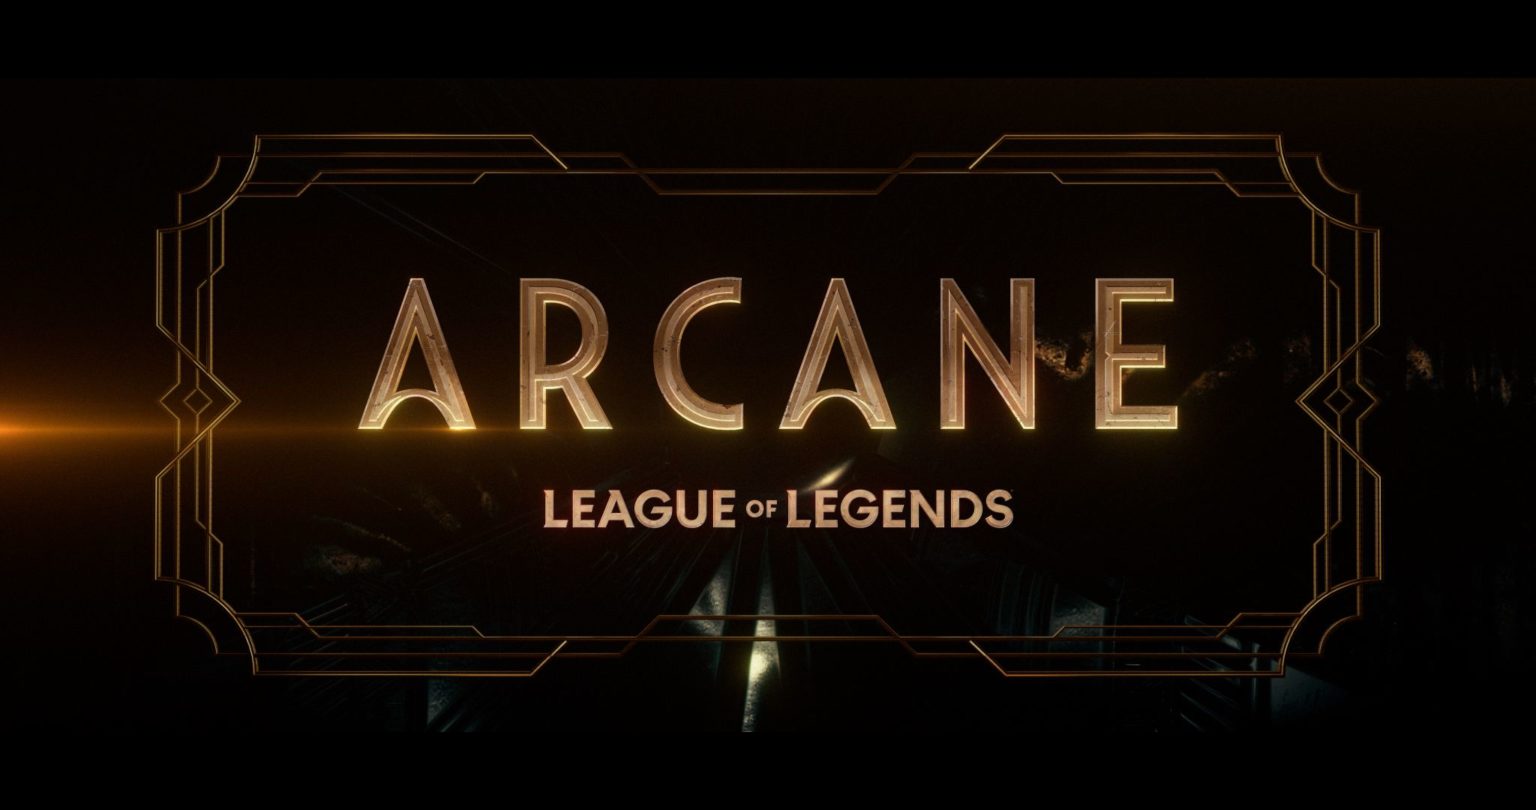 Riot releases official trailer and launch date for Arcane